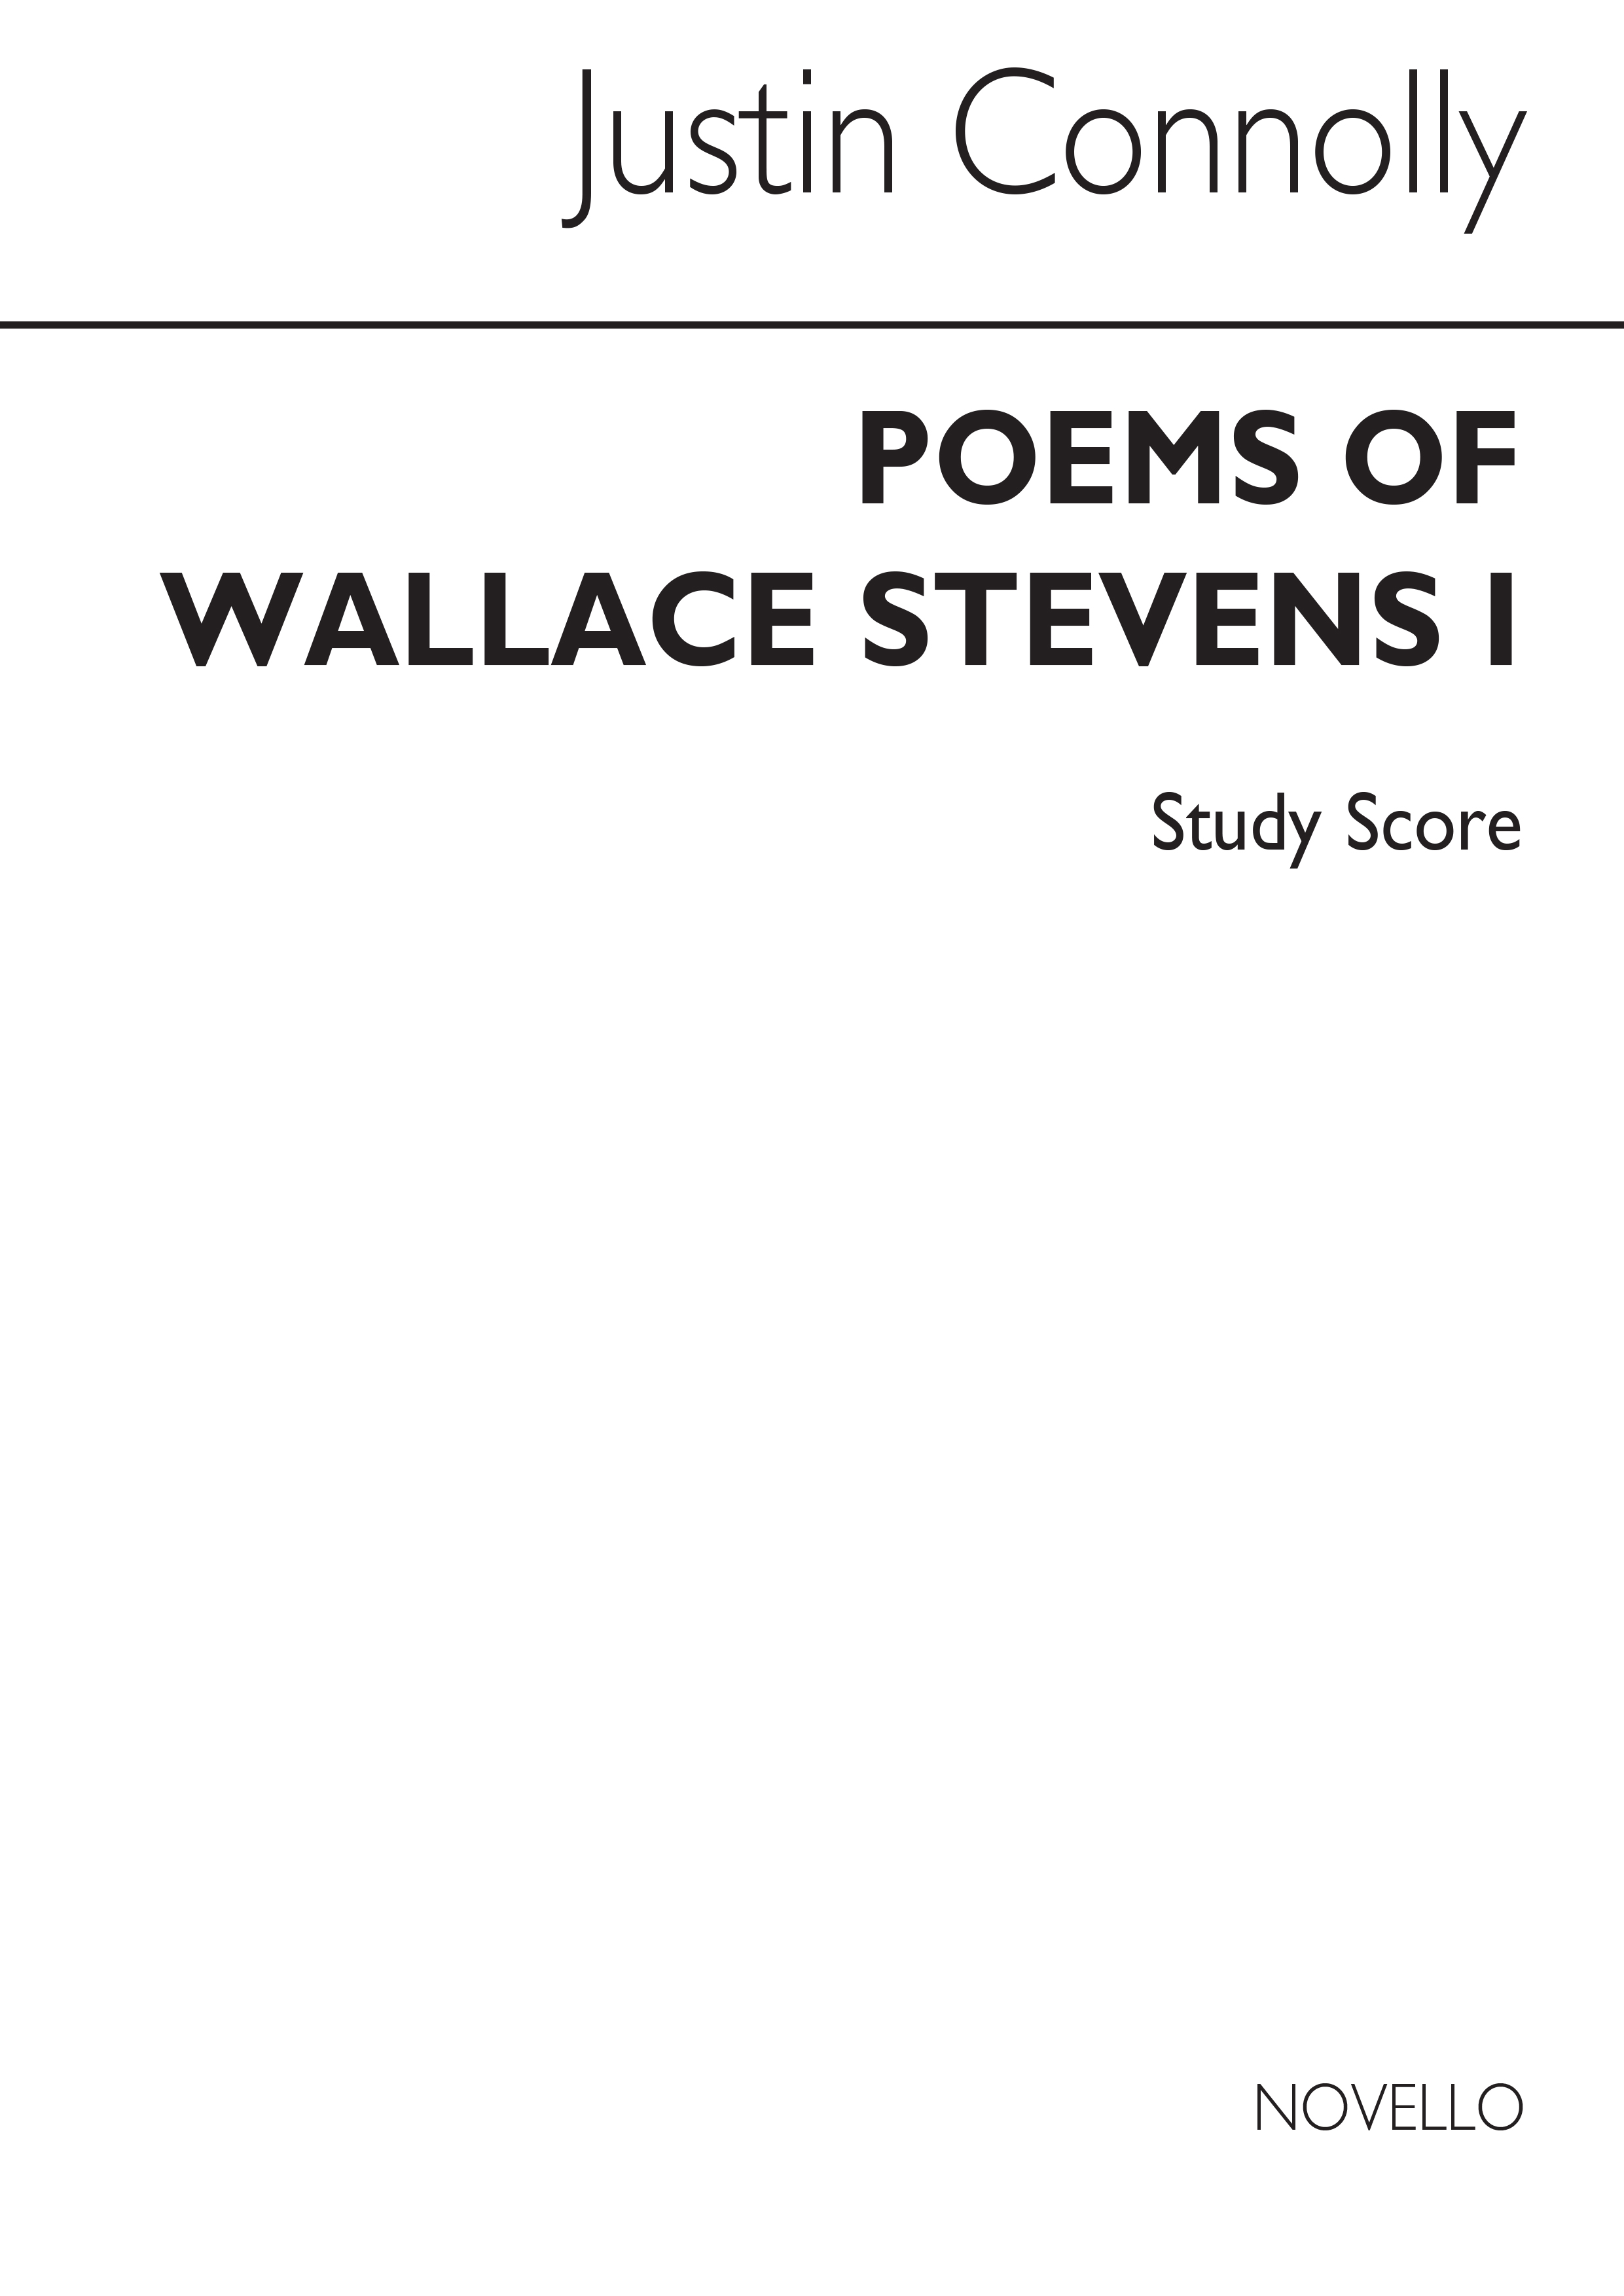 Connolly: Poems Of Wallace Stevens (Score)